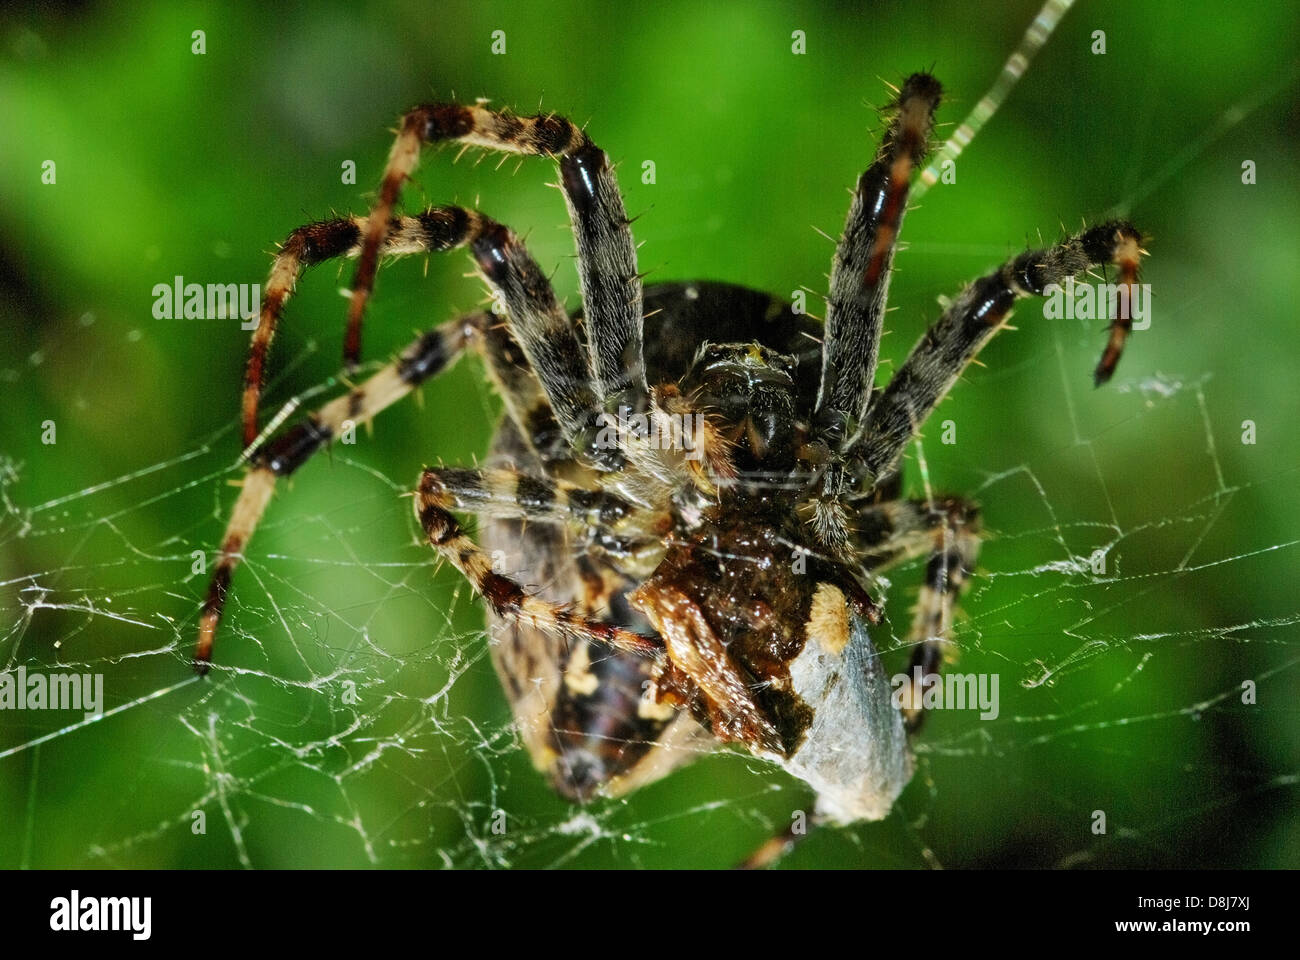 When the Spider eat Prey Stock Photo